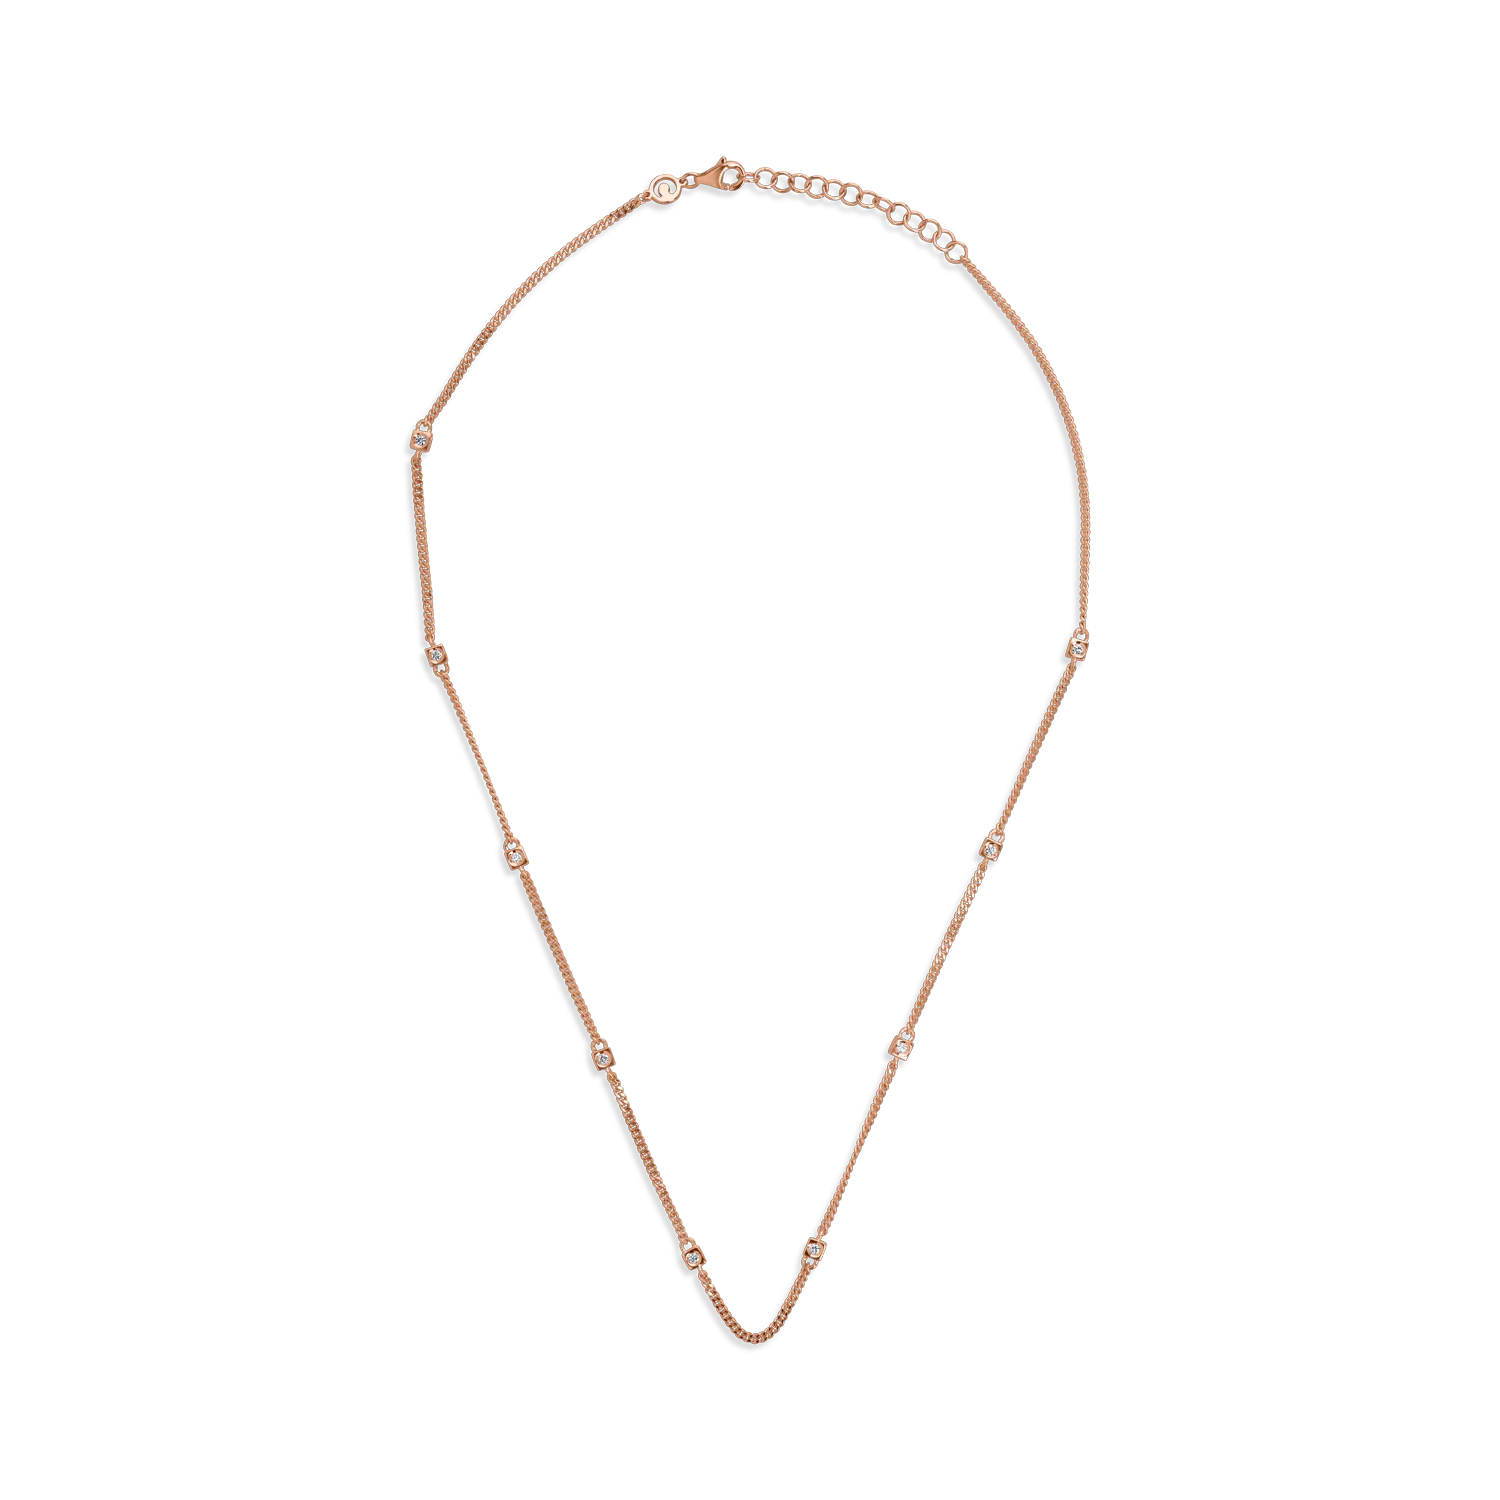 Rose gold chain with 0.6ct diamonds